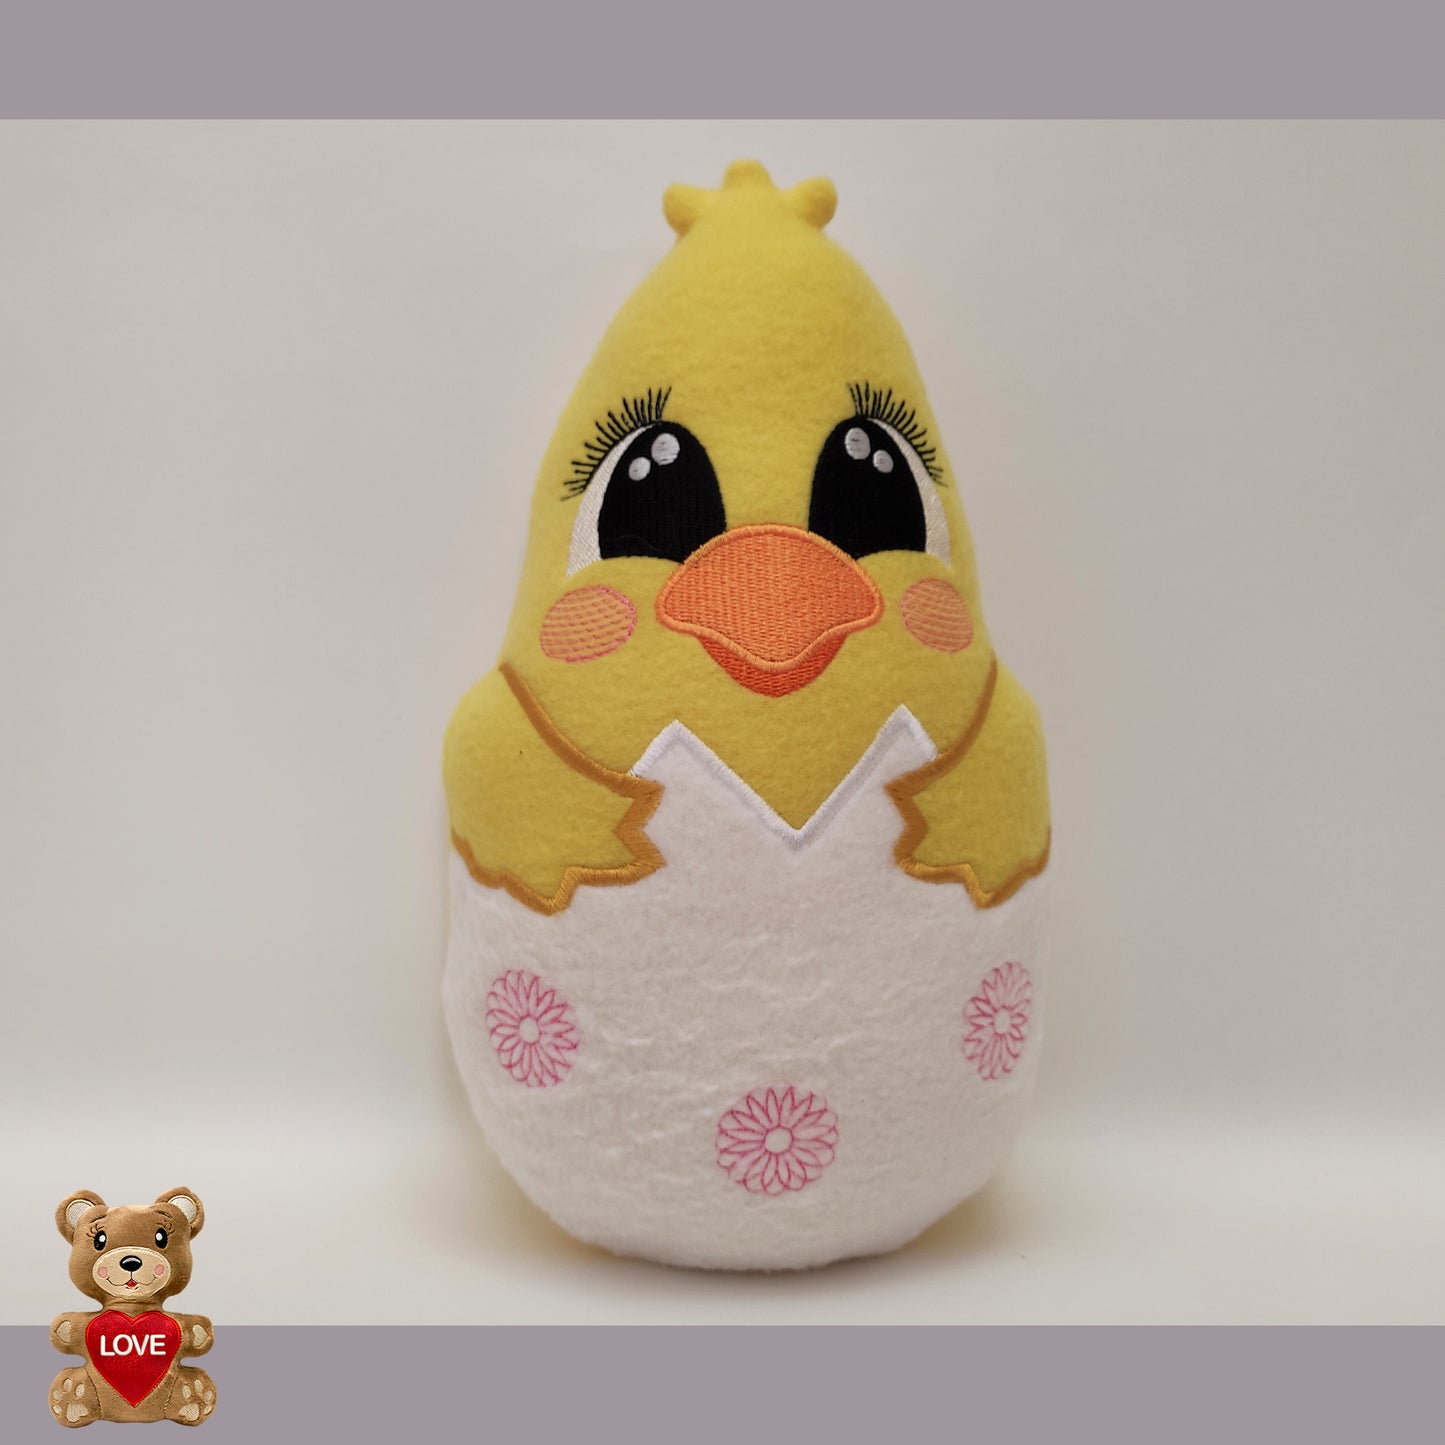 Personalised Cute Chicken Stuffed toy ,Super cute personalised soft plush toy, Personalised Gift, Unique Personalized Birthday Gifts , Custom Gifts For Children